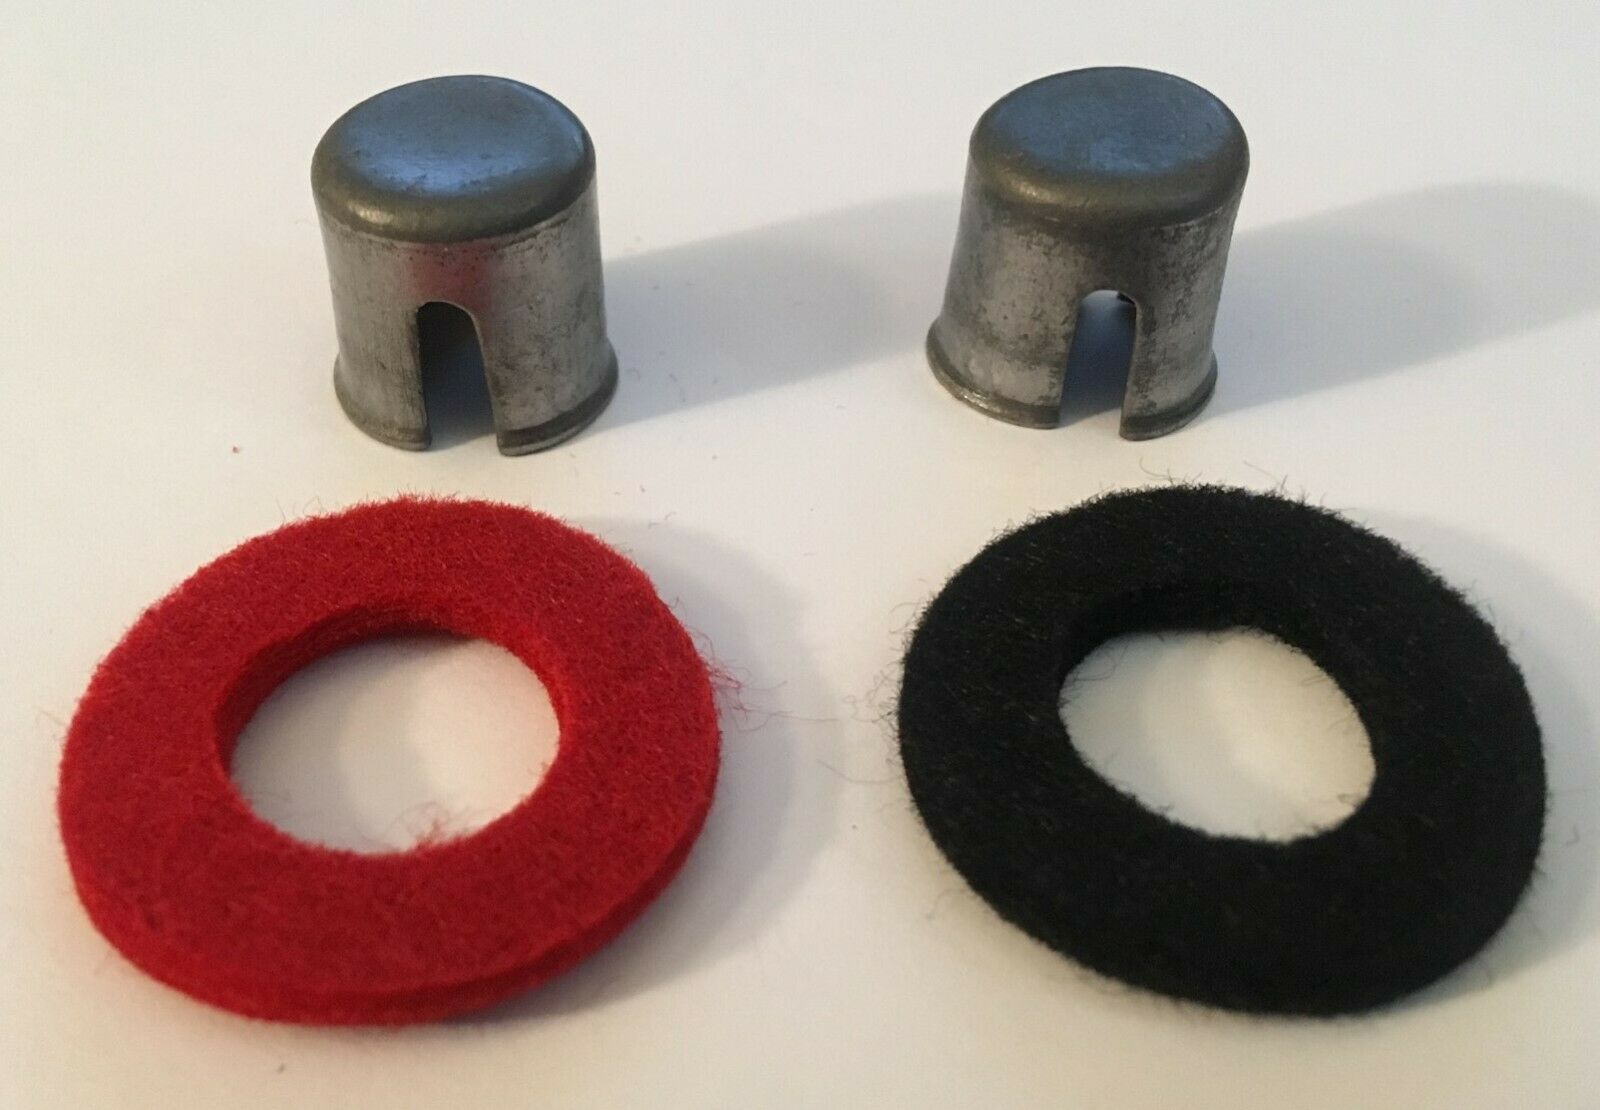 2 Piece Battery Post Lead Shim Cap Terminal Repair With Post Washers Felt Rings